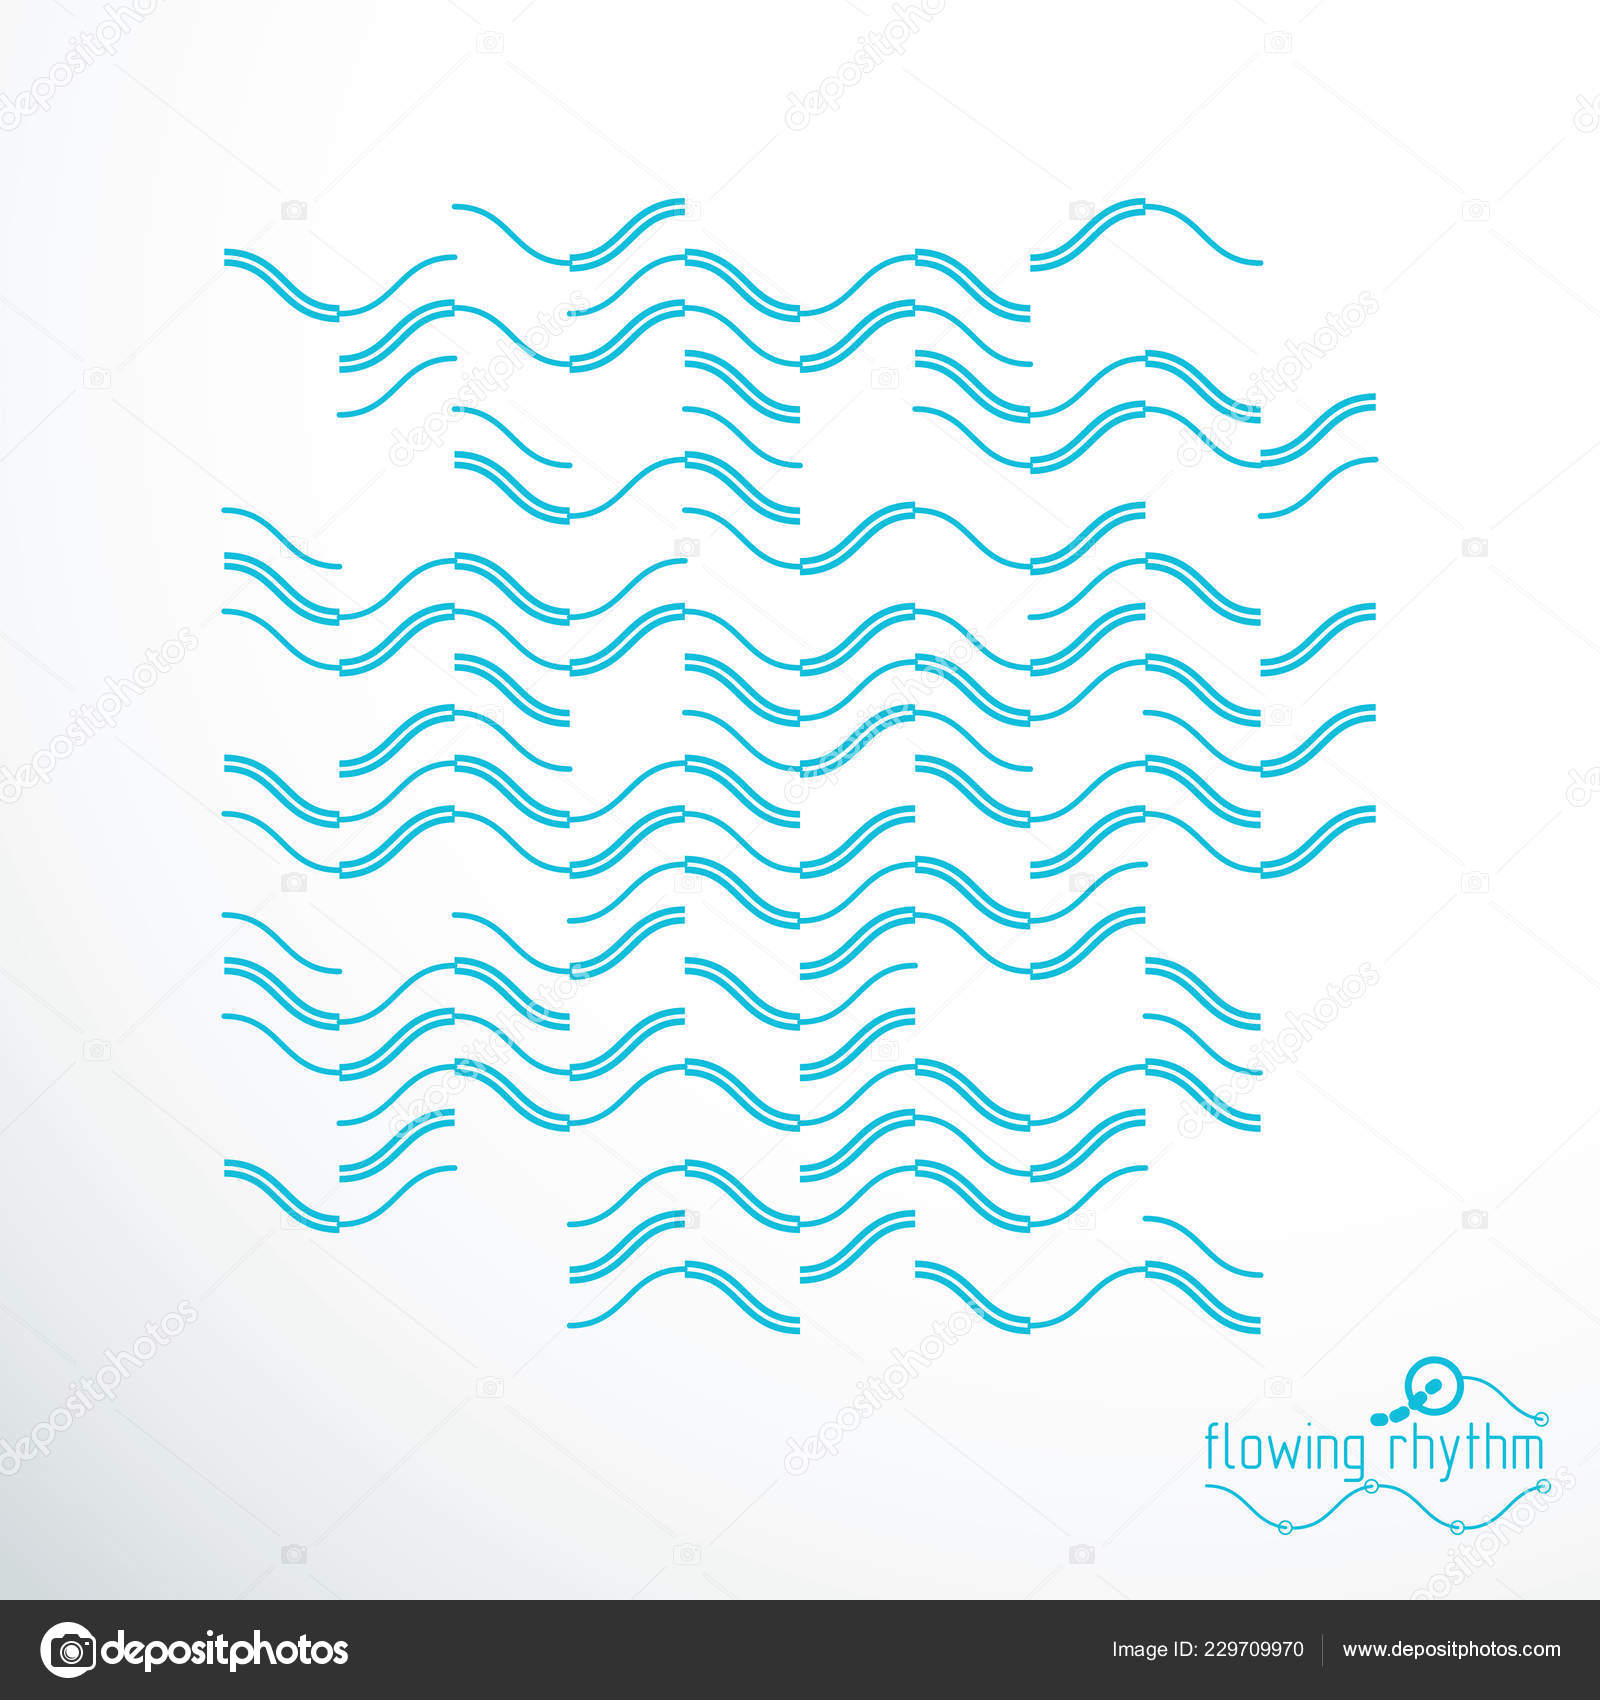 Flowing Rhythm Abstract Wave Lines Vector Background Use Graphic Web Vector Image By C Ostapiusangelp Vector Stock